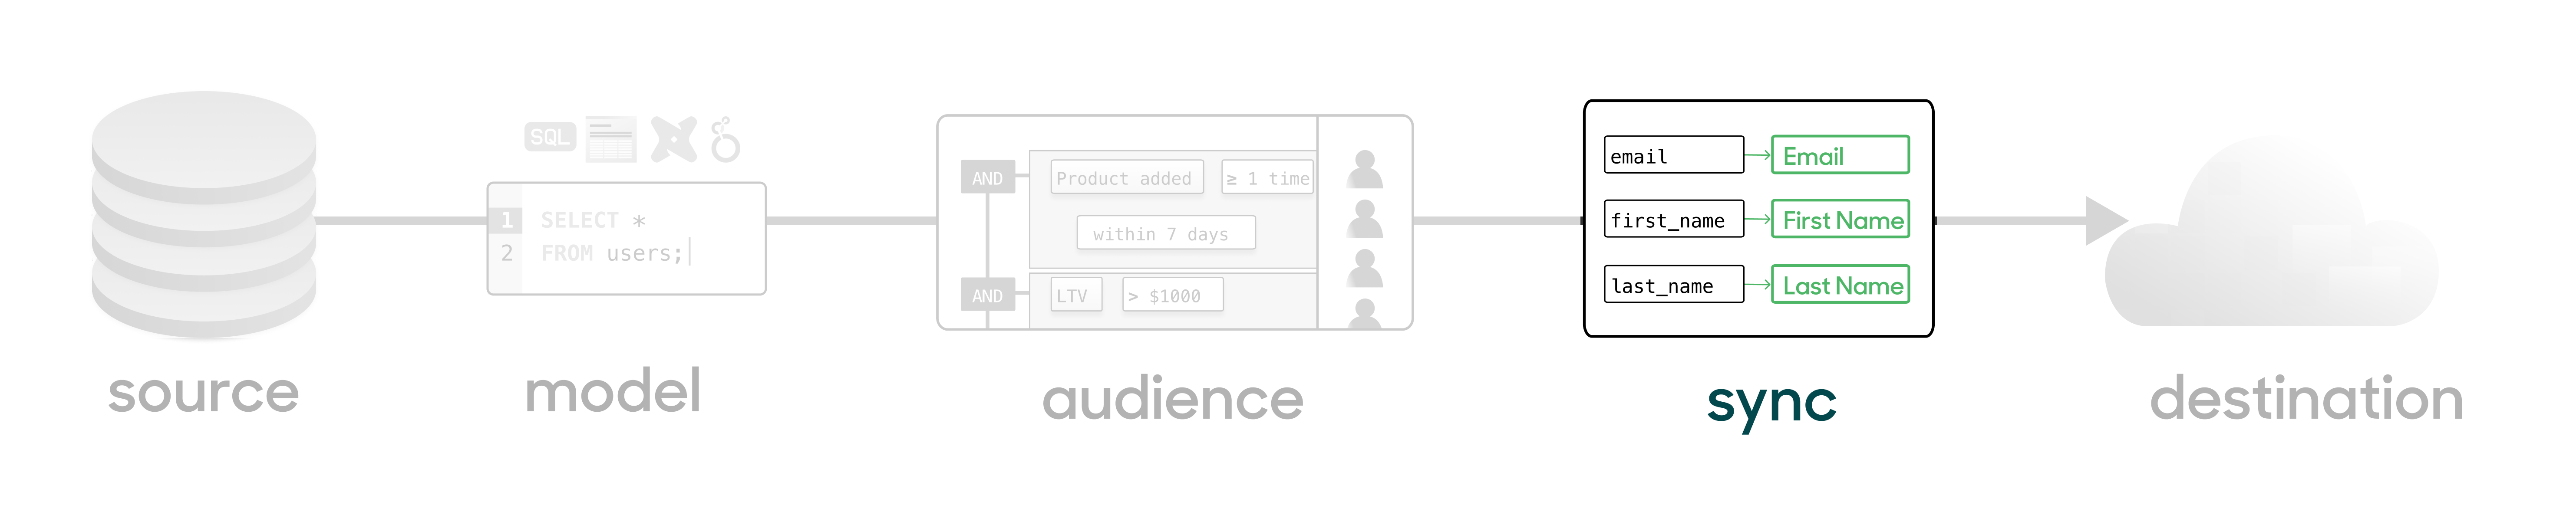 Audience sync diagram